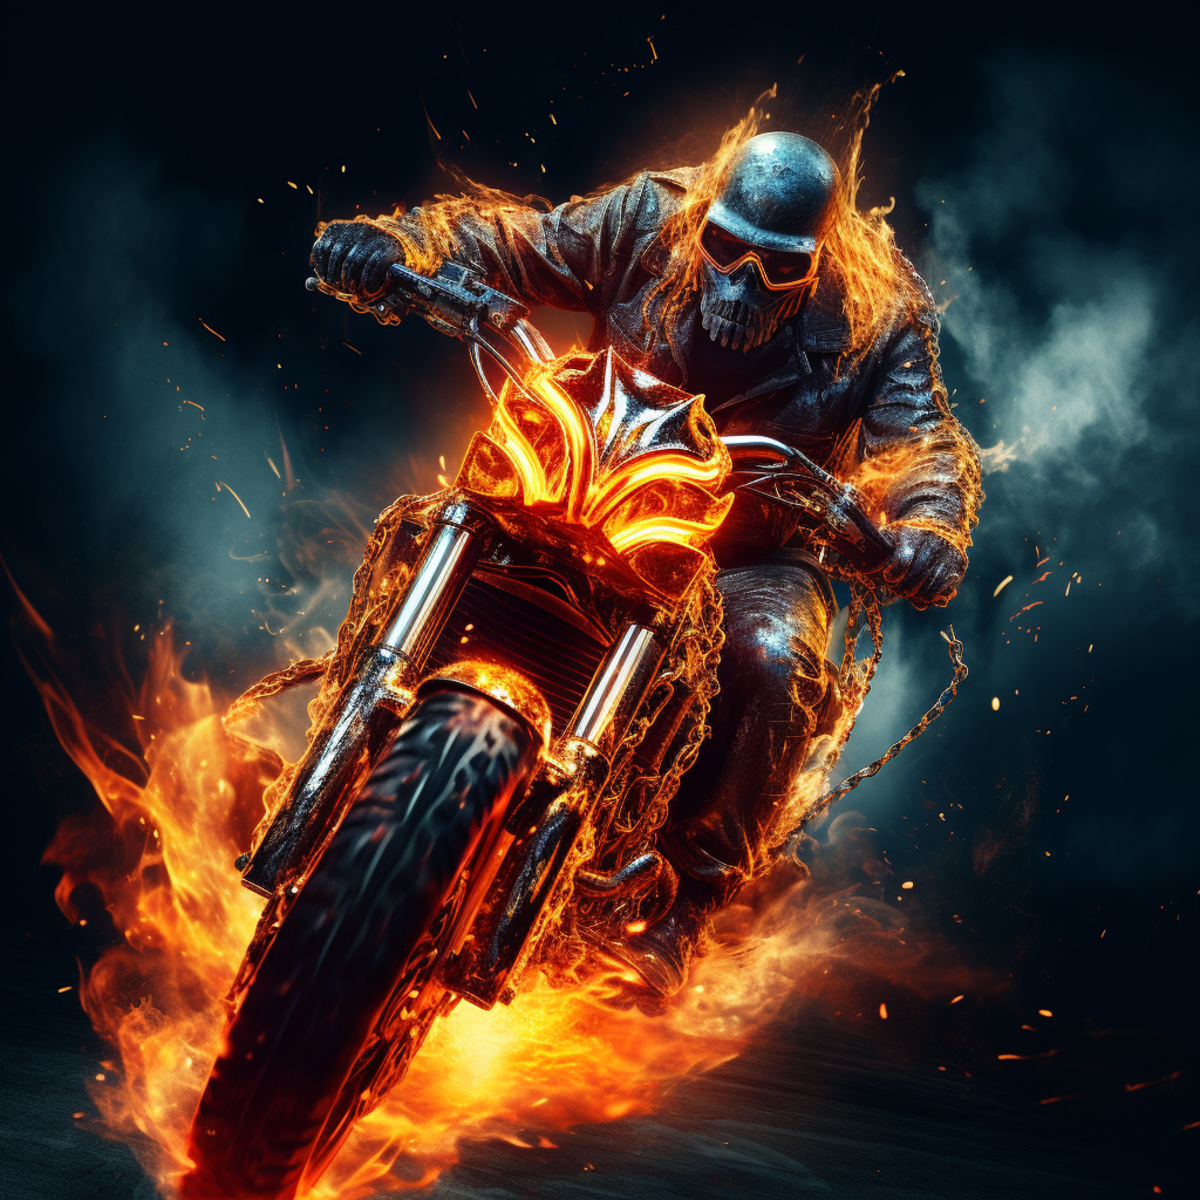 10 Striking Ghost Rider Photos That Will Leave You In Awe - HubPages